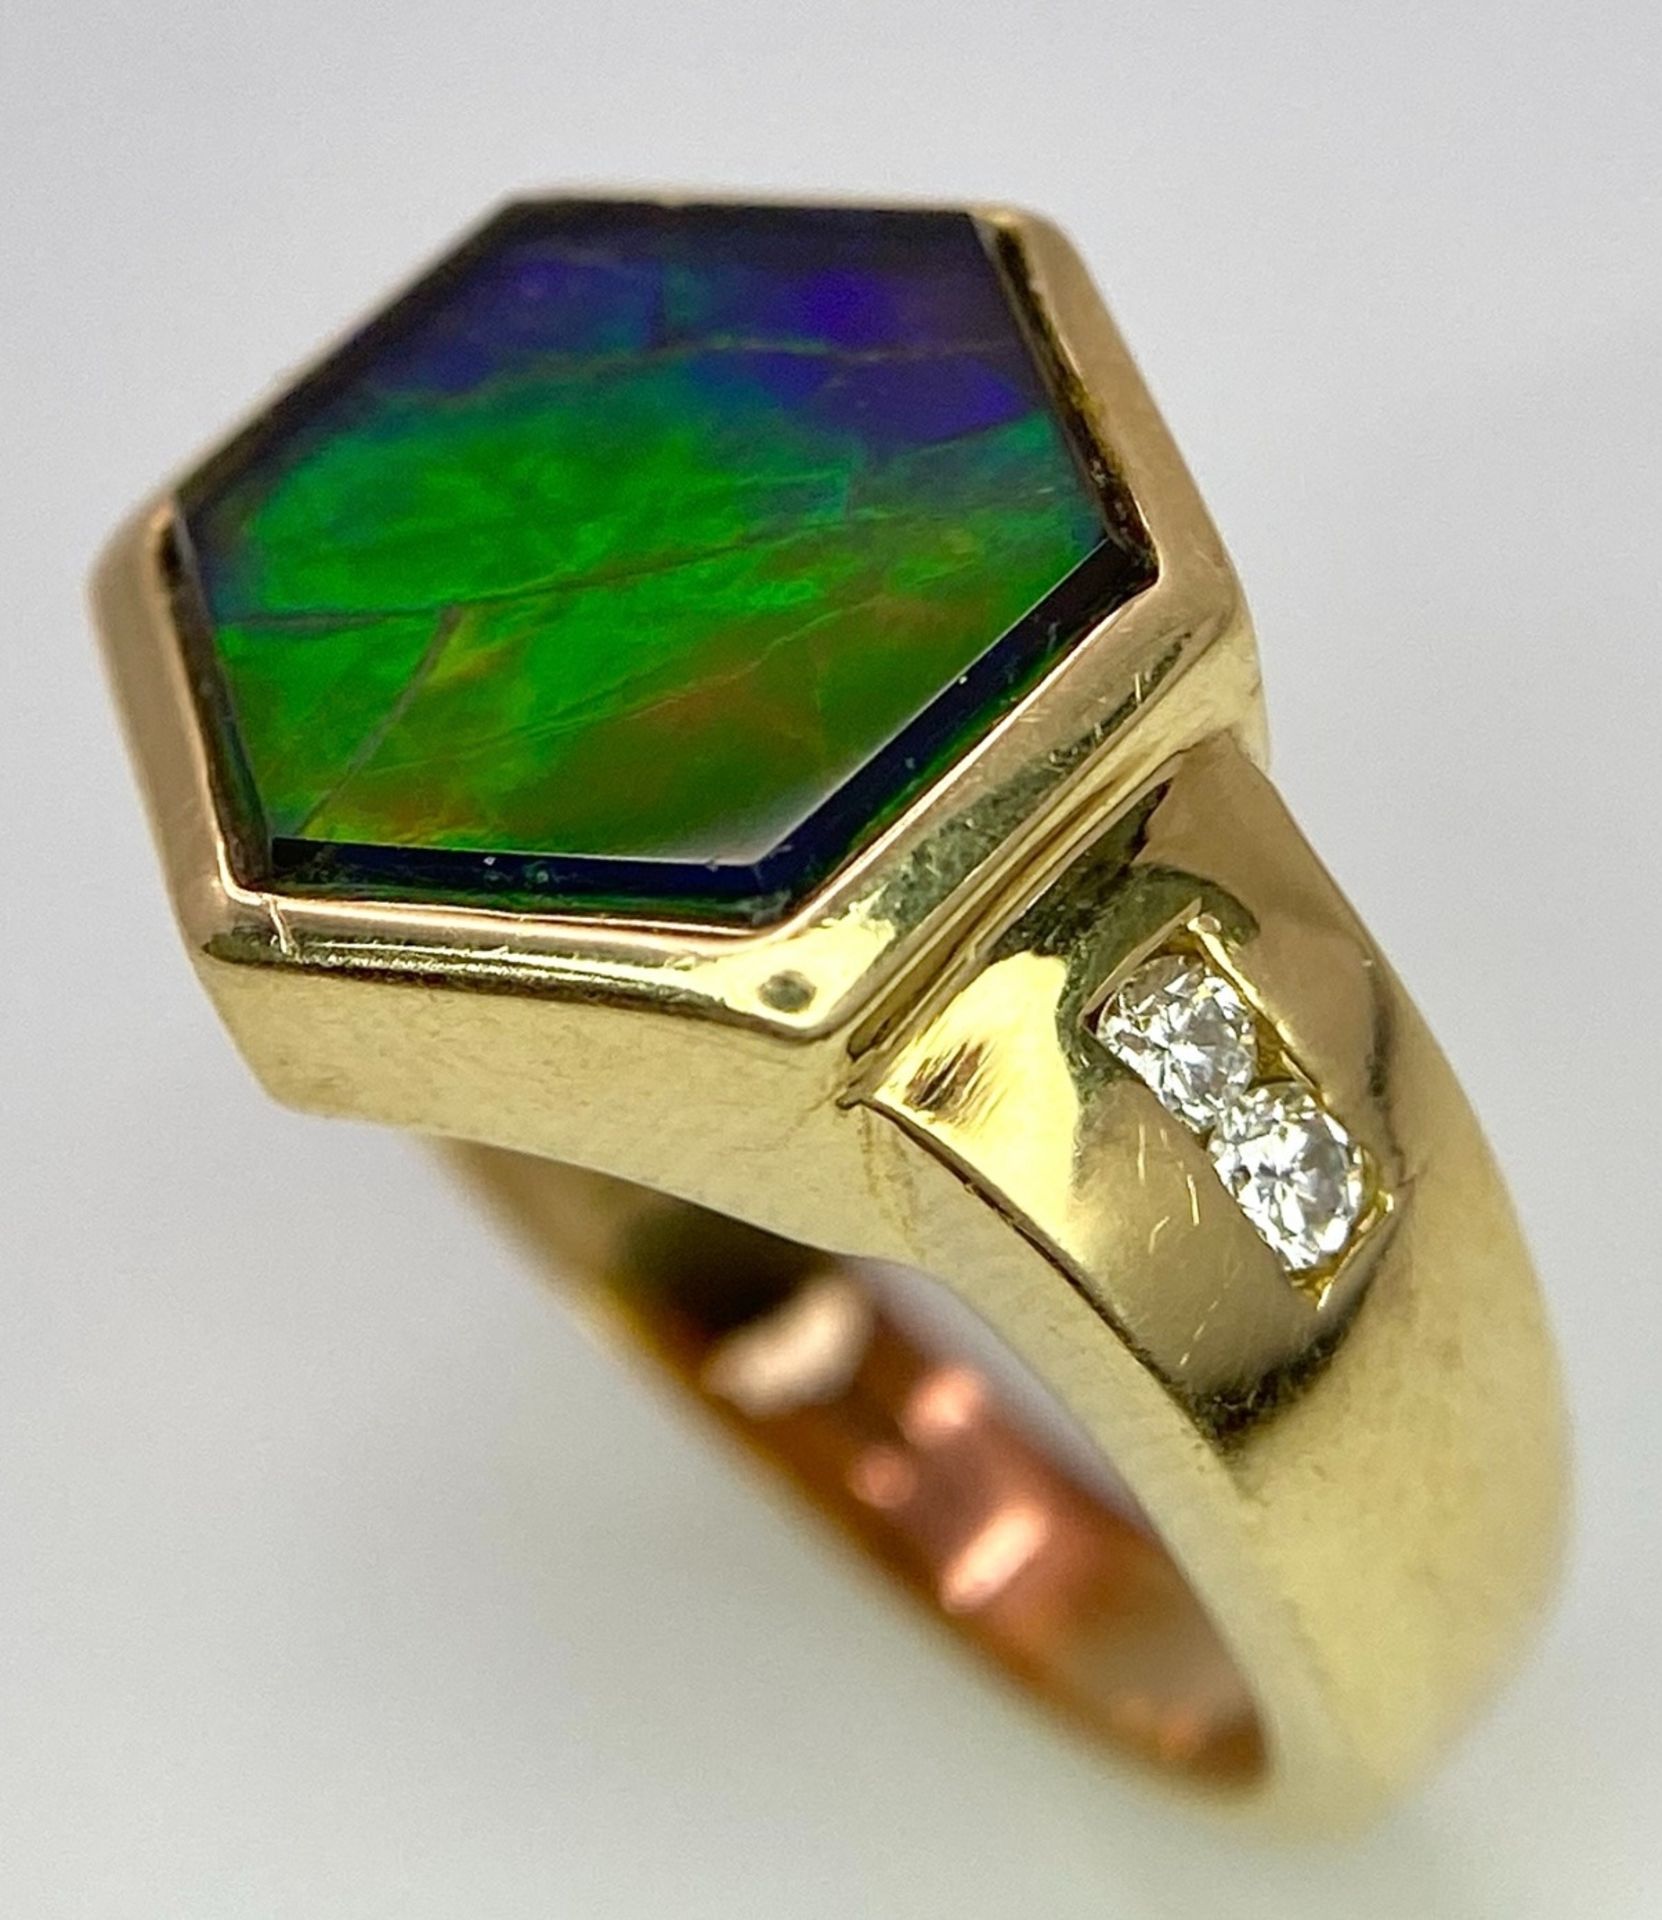 A Very Different, 14K Gold, Ammolite and Diamond Ring. Hexagonal shape. Size L. 6.3g total weight. - Image 6 of 9